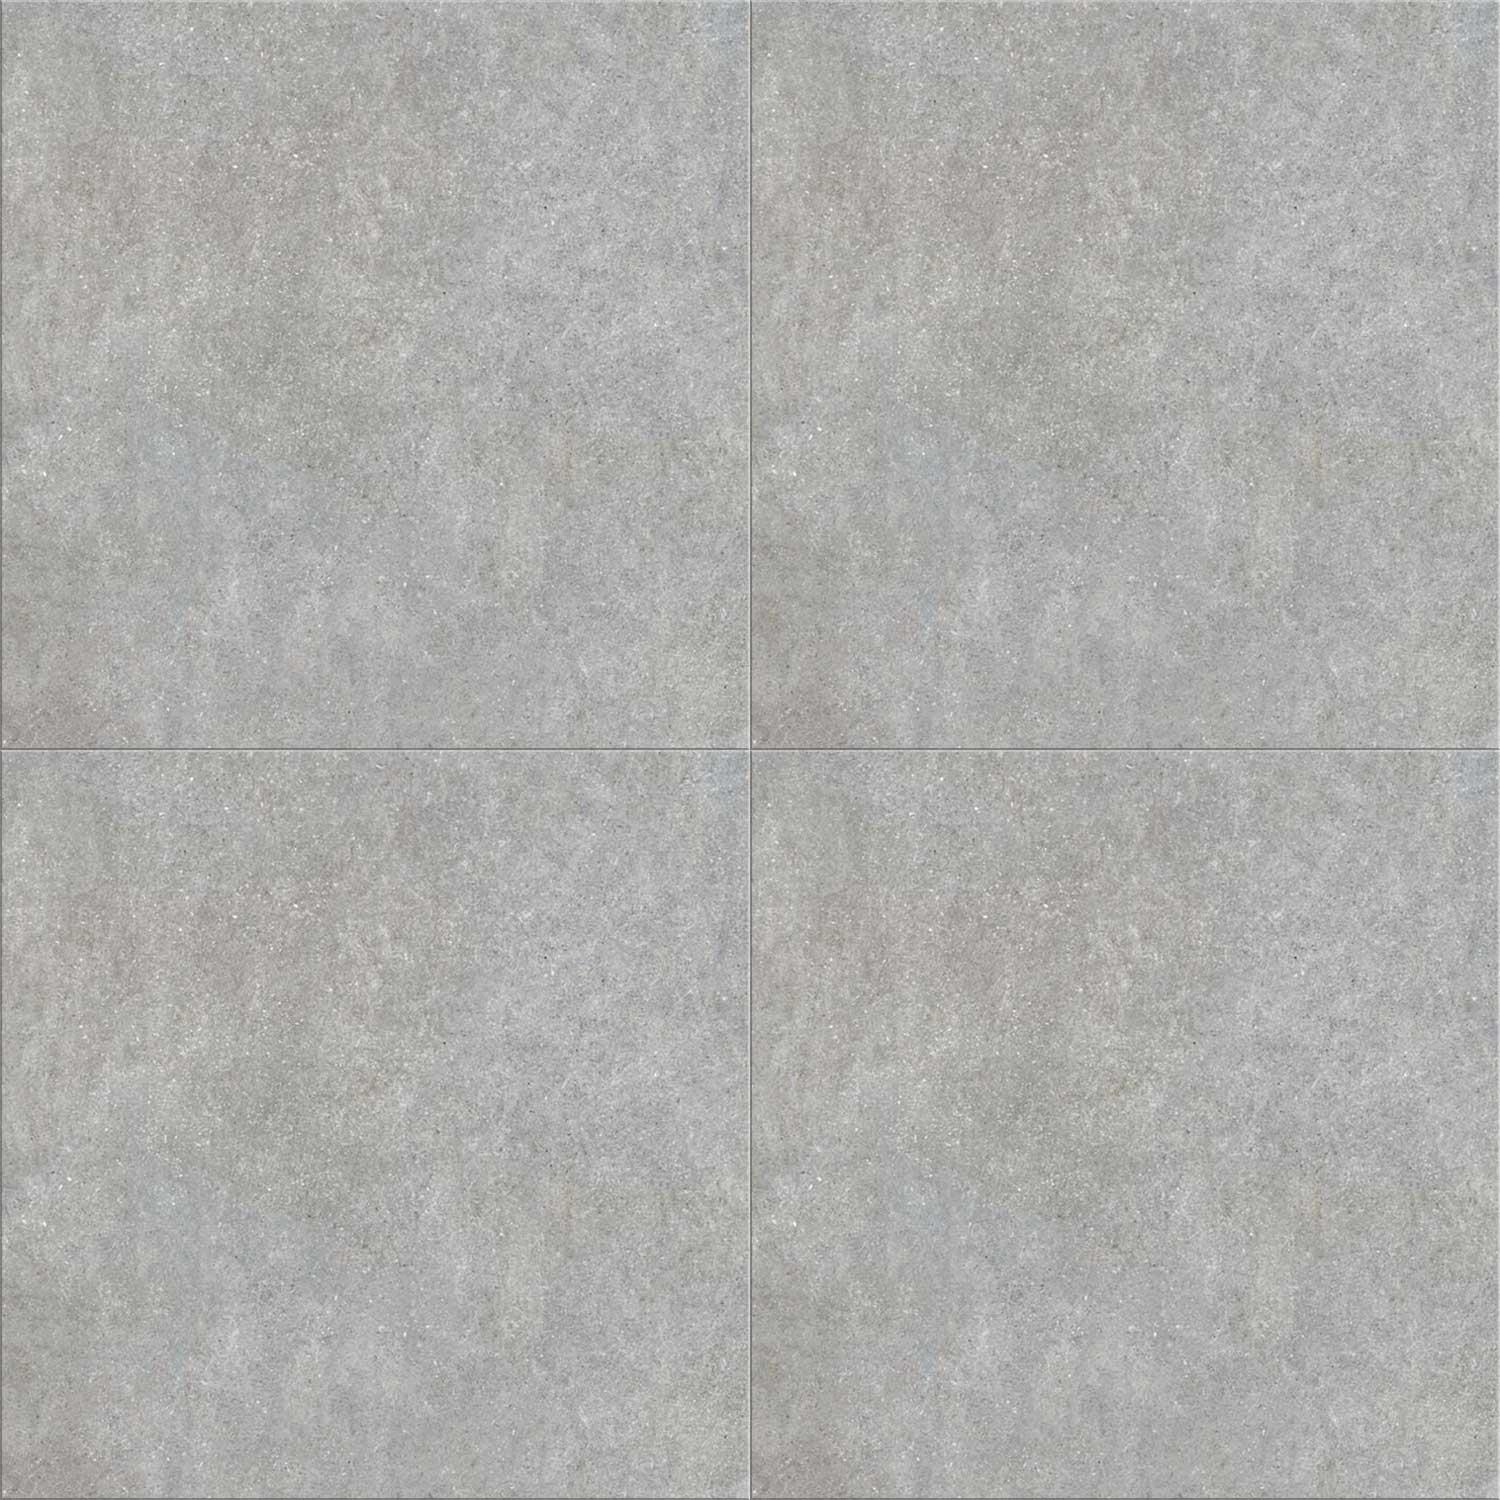 Neolith Grey Porcelain Tile Wall Floor Large Square 595 x 595mm